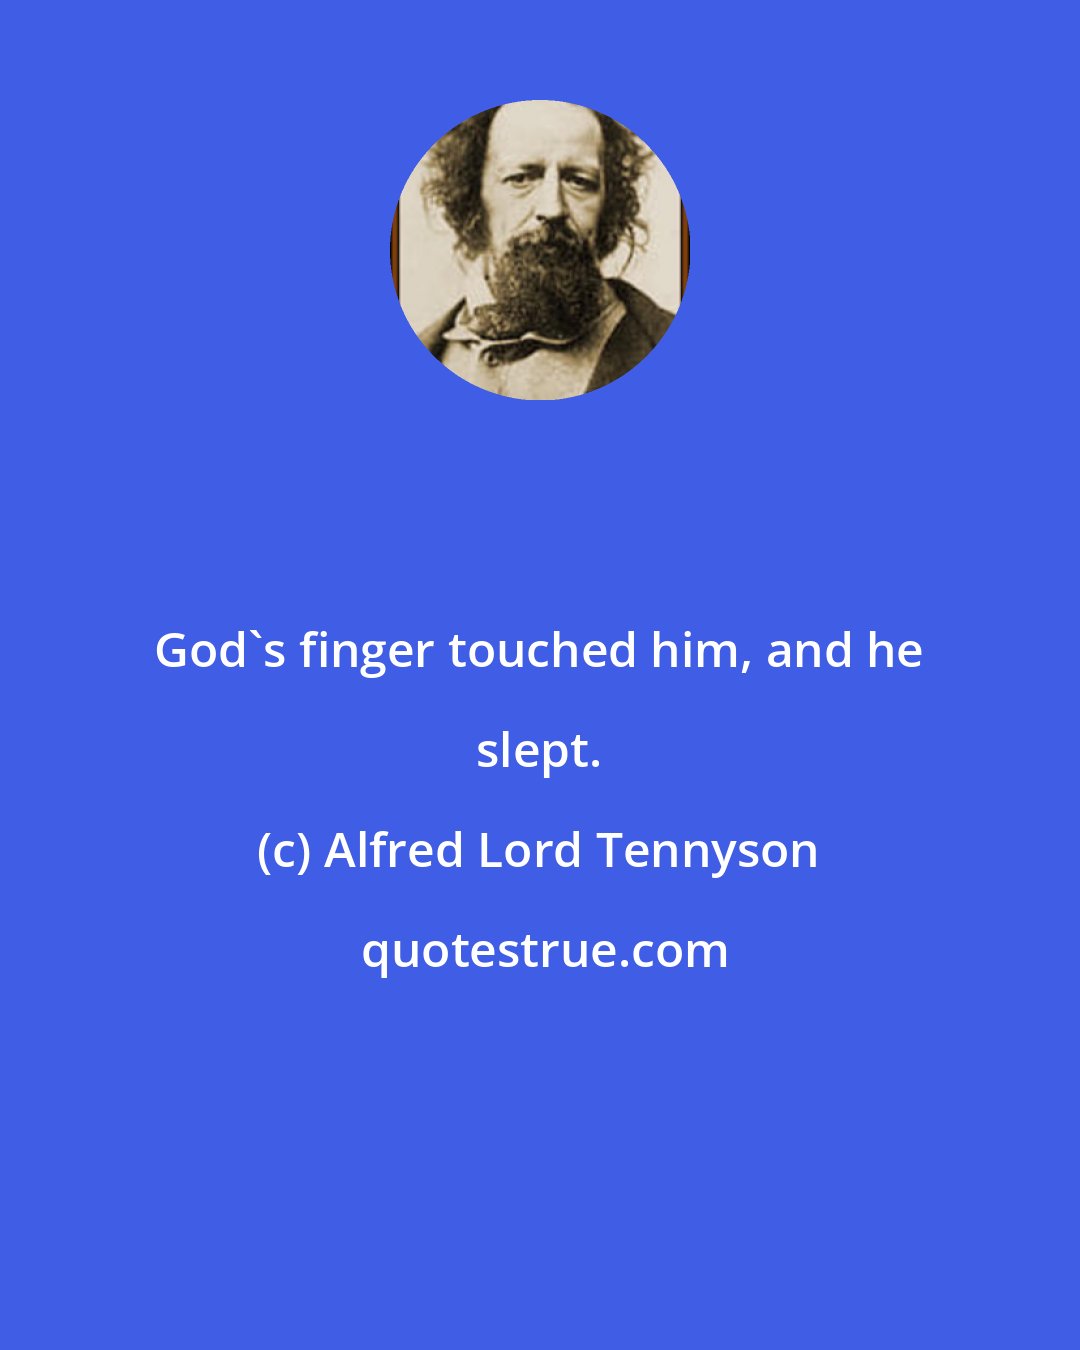 Alfred Lord Tennyson: God's finger touched him, and he slept.